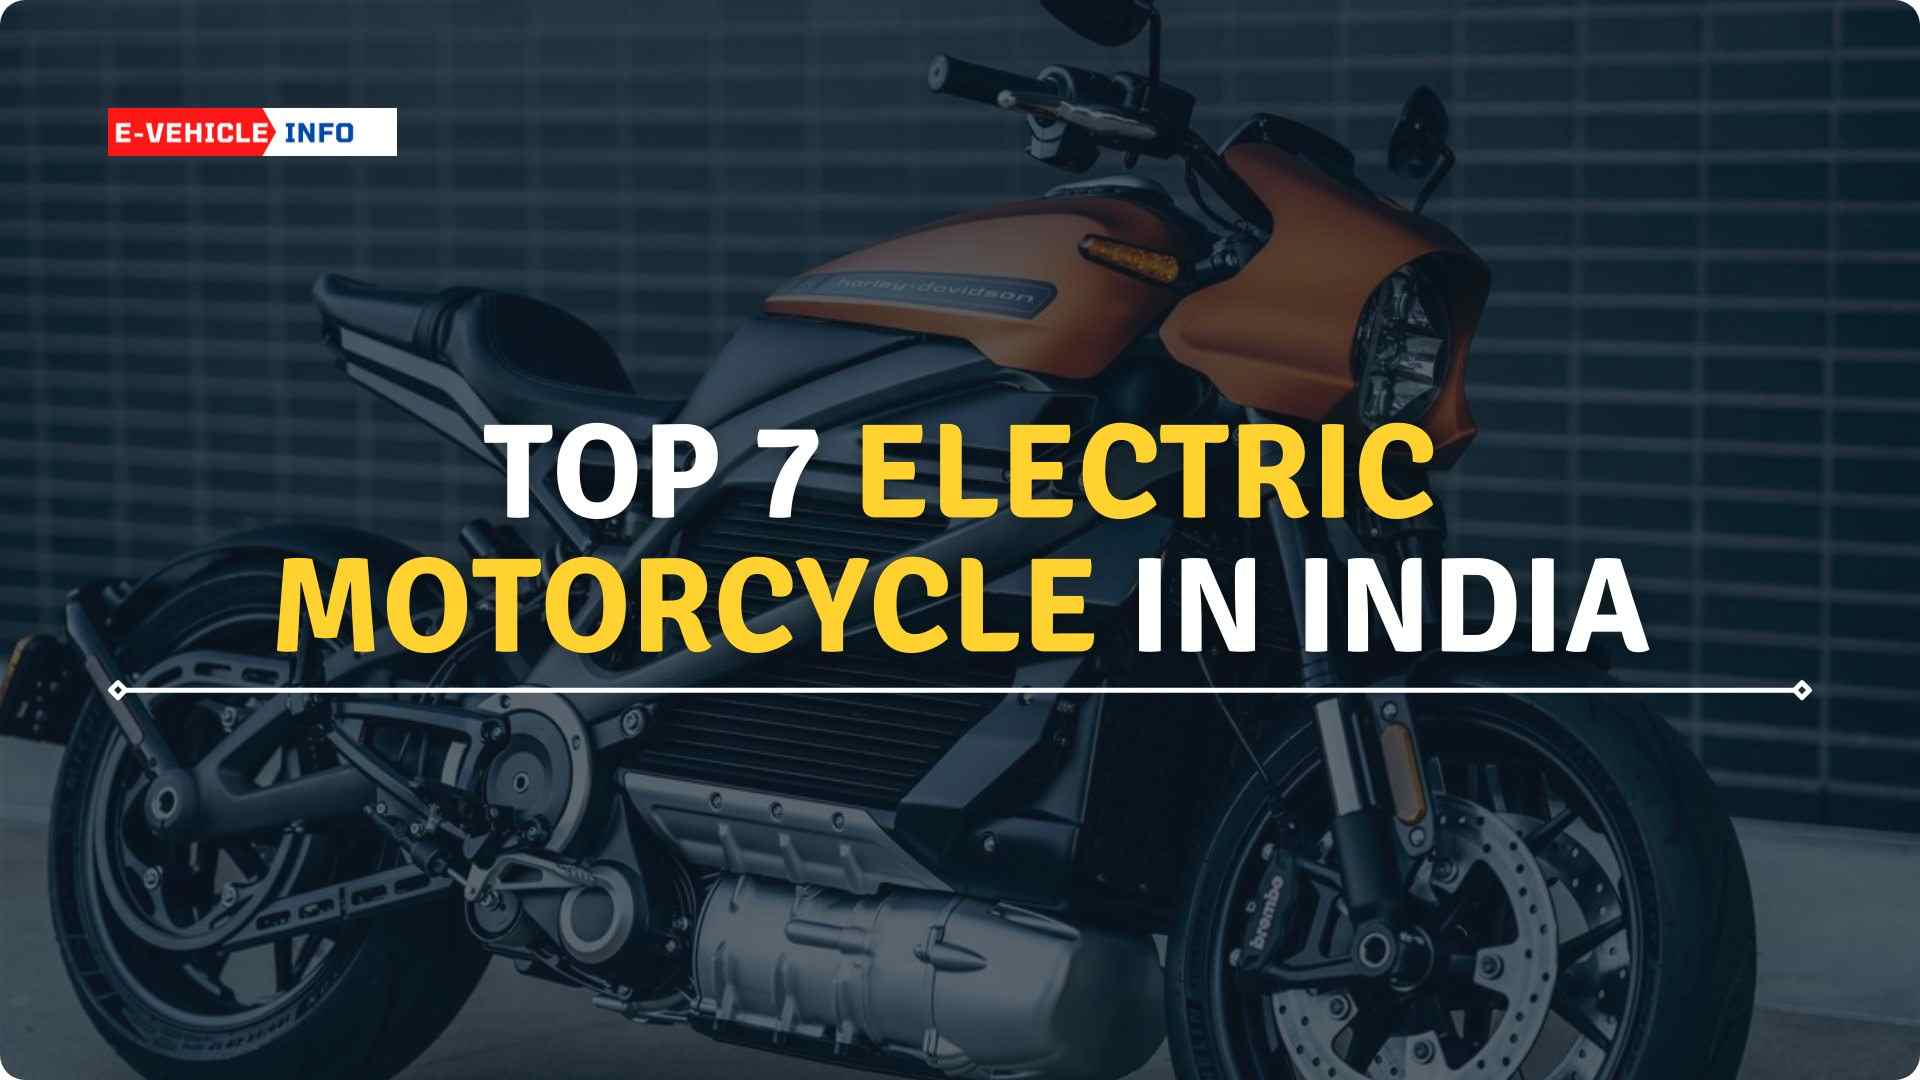 https://e-vehicleinfo.com/top-7-electric-motorcycle-in-india/